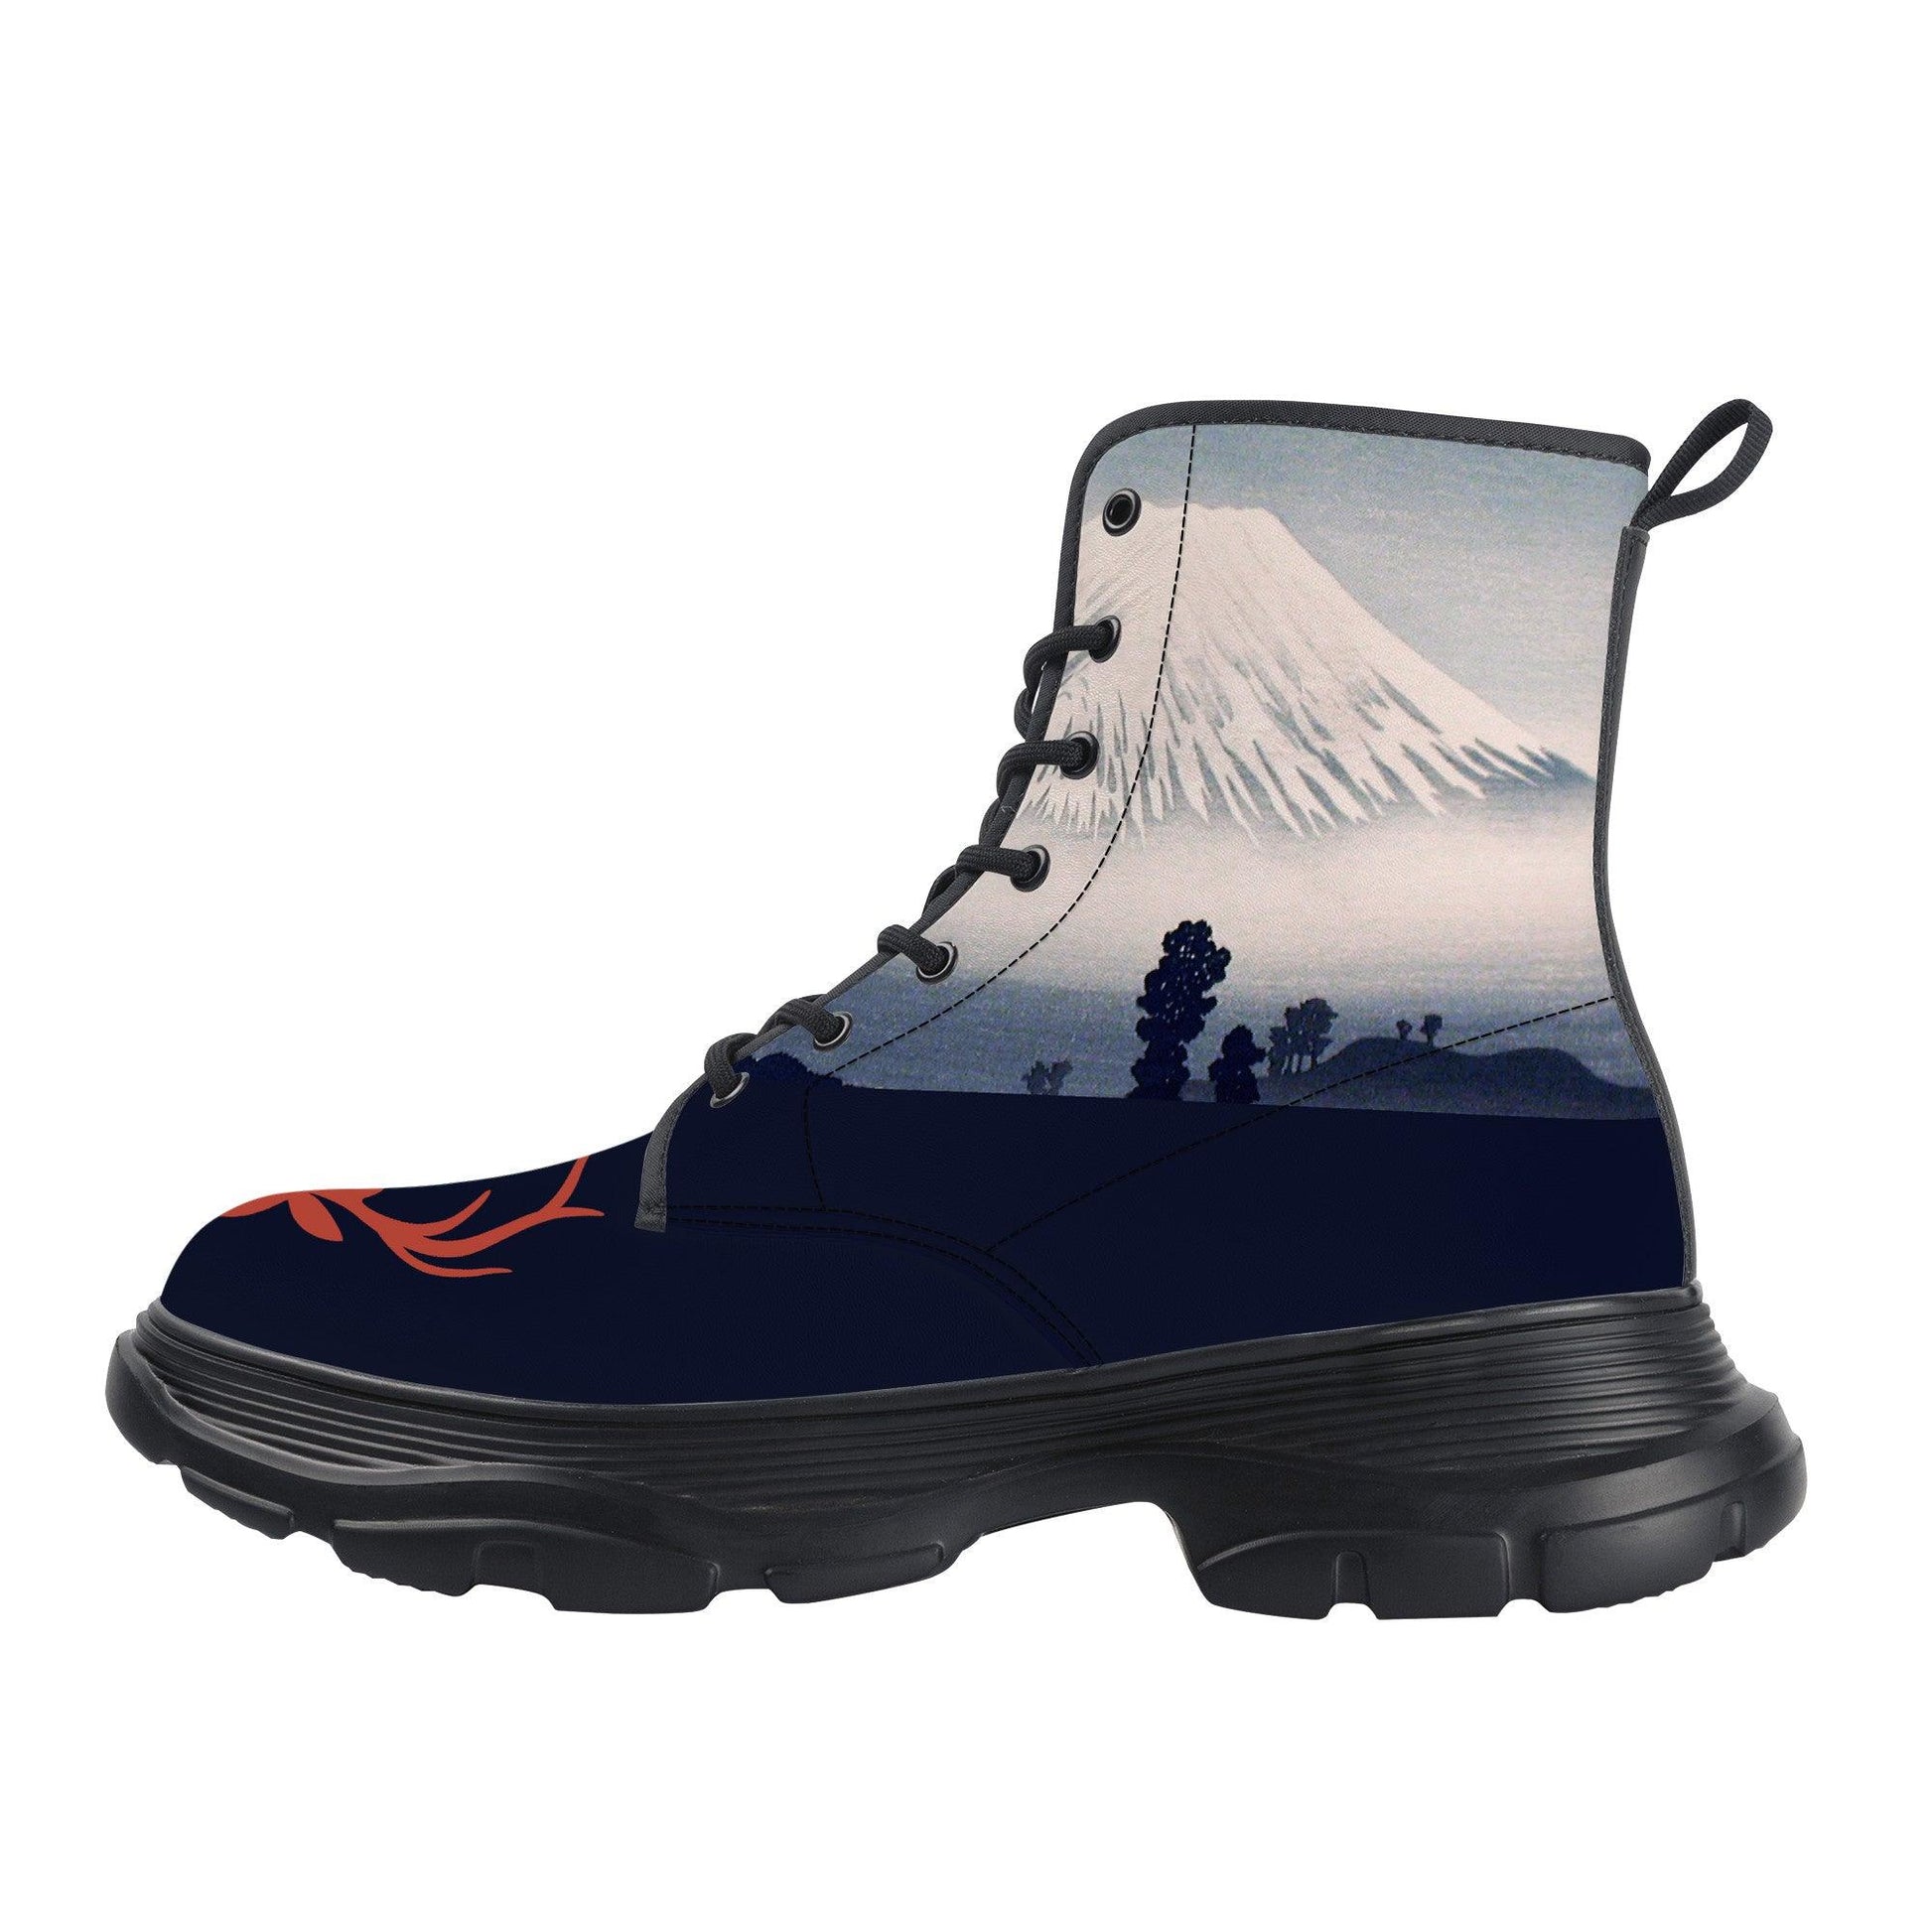 Mount Fuji in Mist by H. Takahashi - Chunky Boots